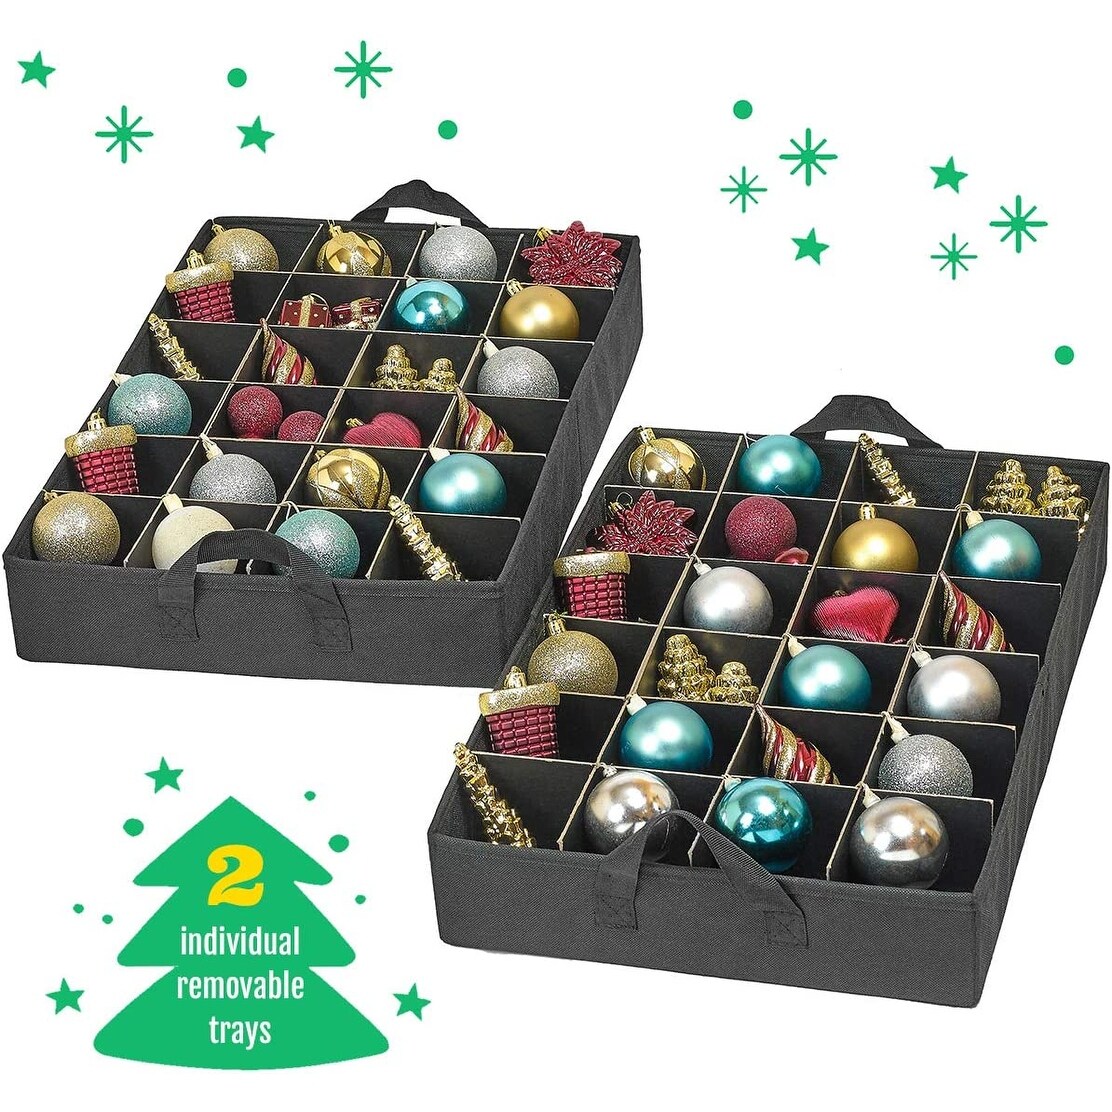  Christmas Ornament Storage Container with 2 Removable